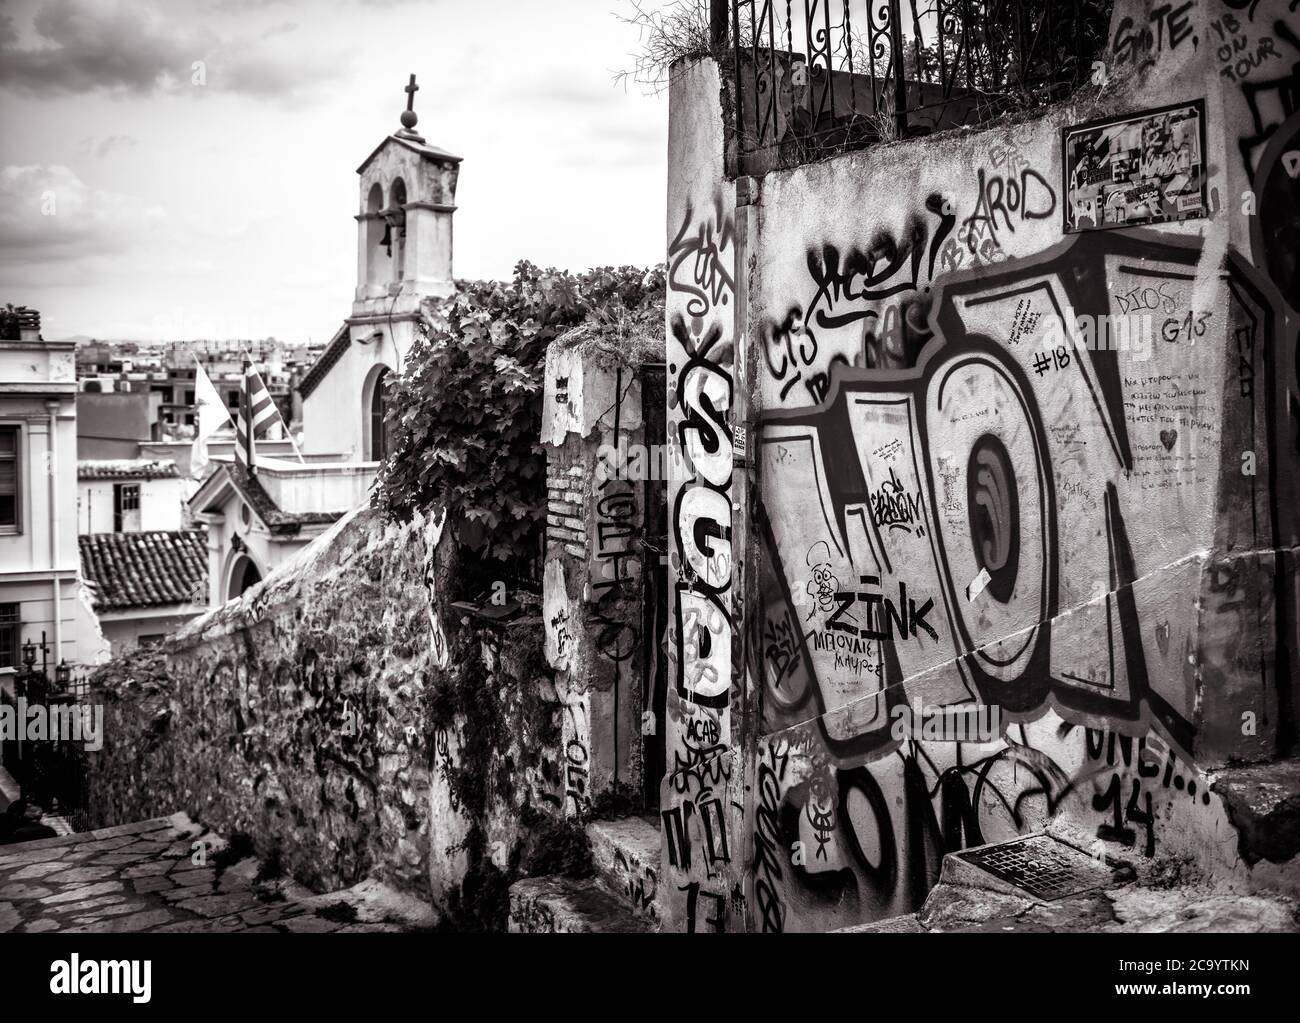 Athens - May 6, 2018: Old street with graffiti in Plaka district, Athens, Greece. Plaka is one of main tourist attractions of Athens. Traditional vint Stock Photo